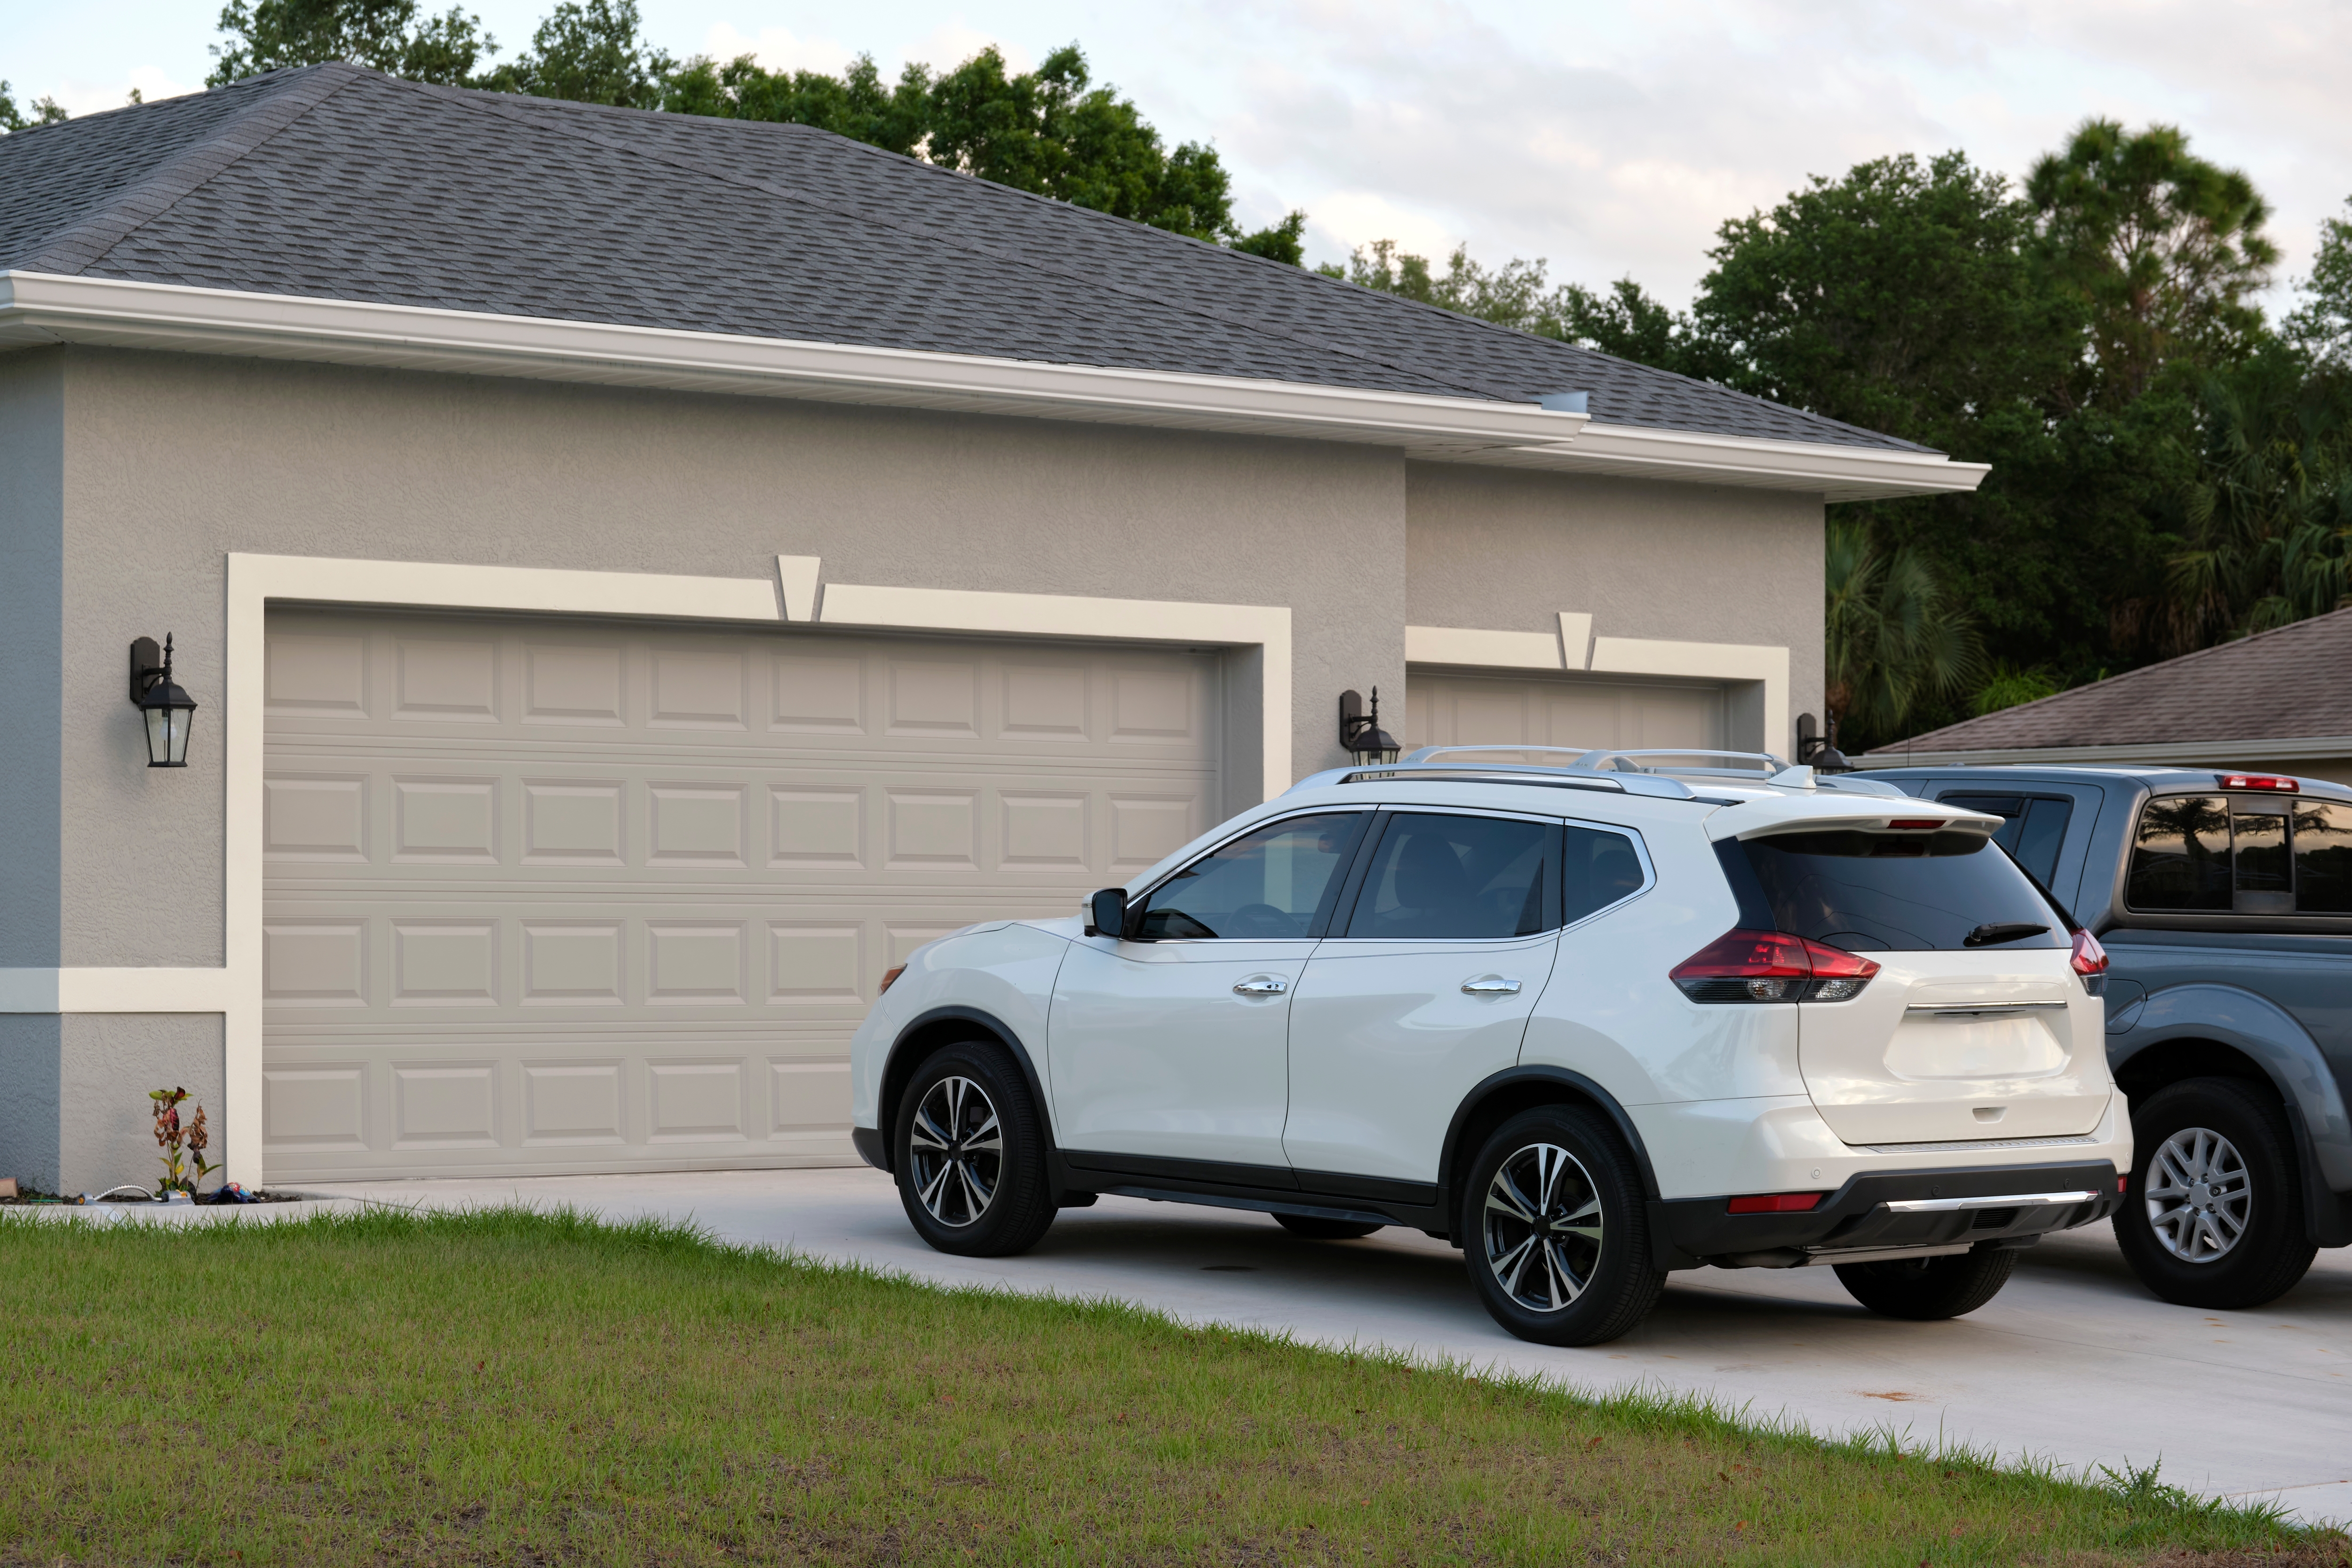 Car parked in front of wide garage double door on concrete driveway of new modern american house. | Source: Shutterstock